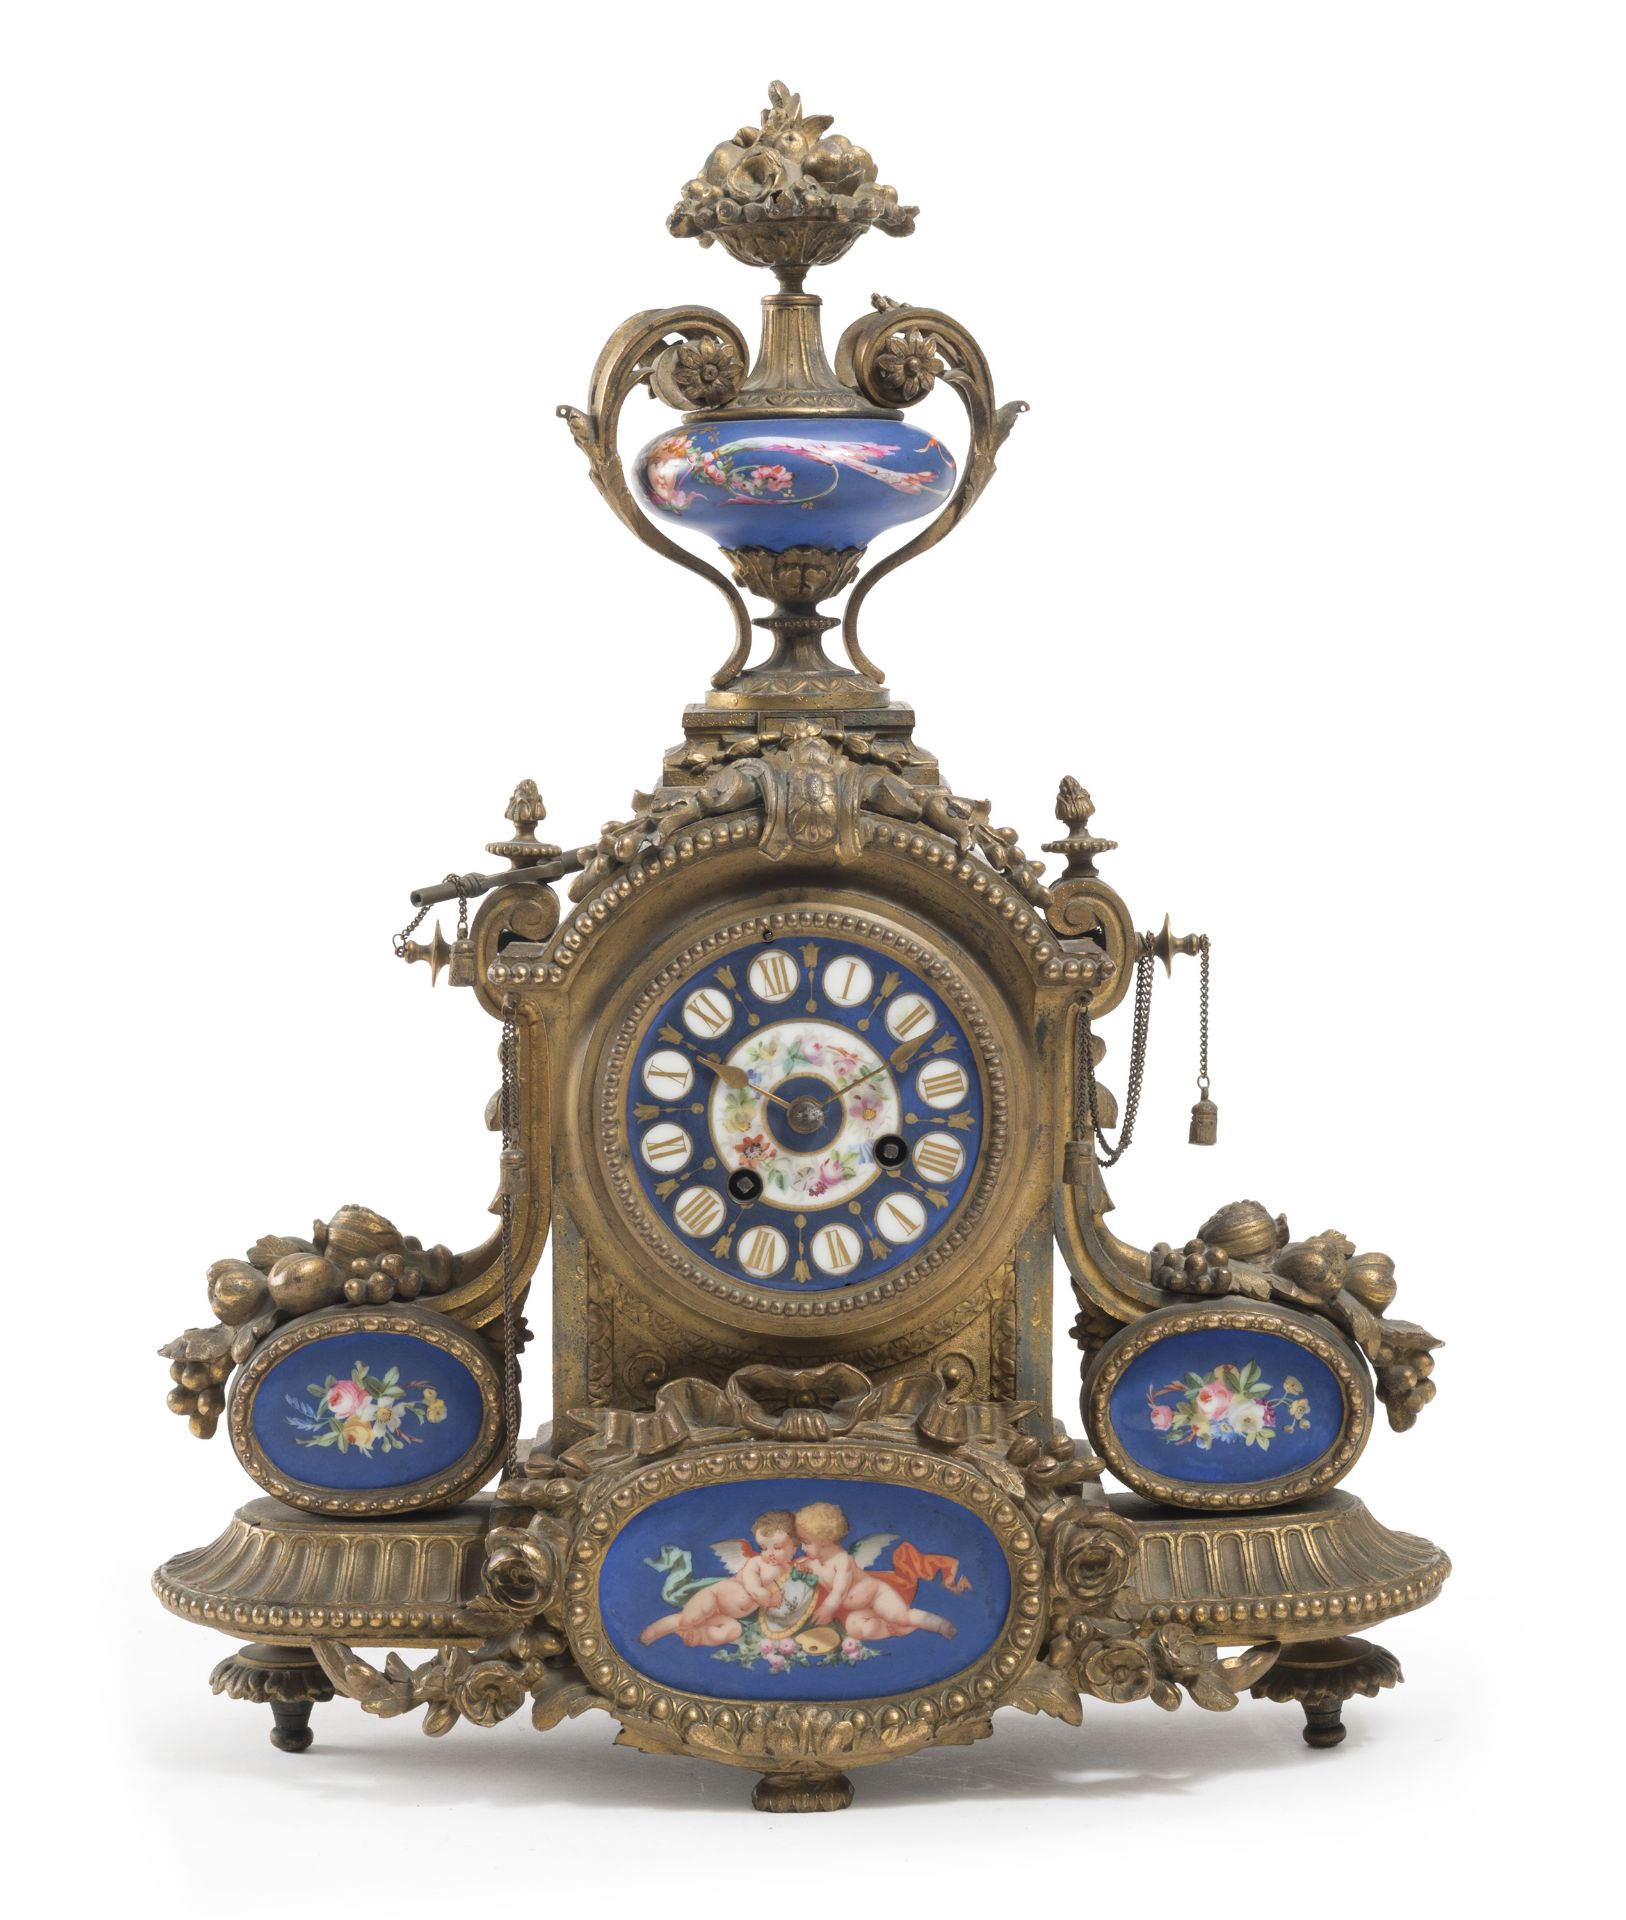 BRONZE CLOCK WITH PORCELAIN 19TH CENTURY